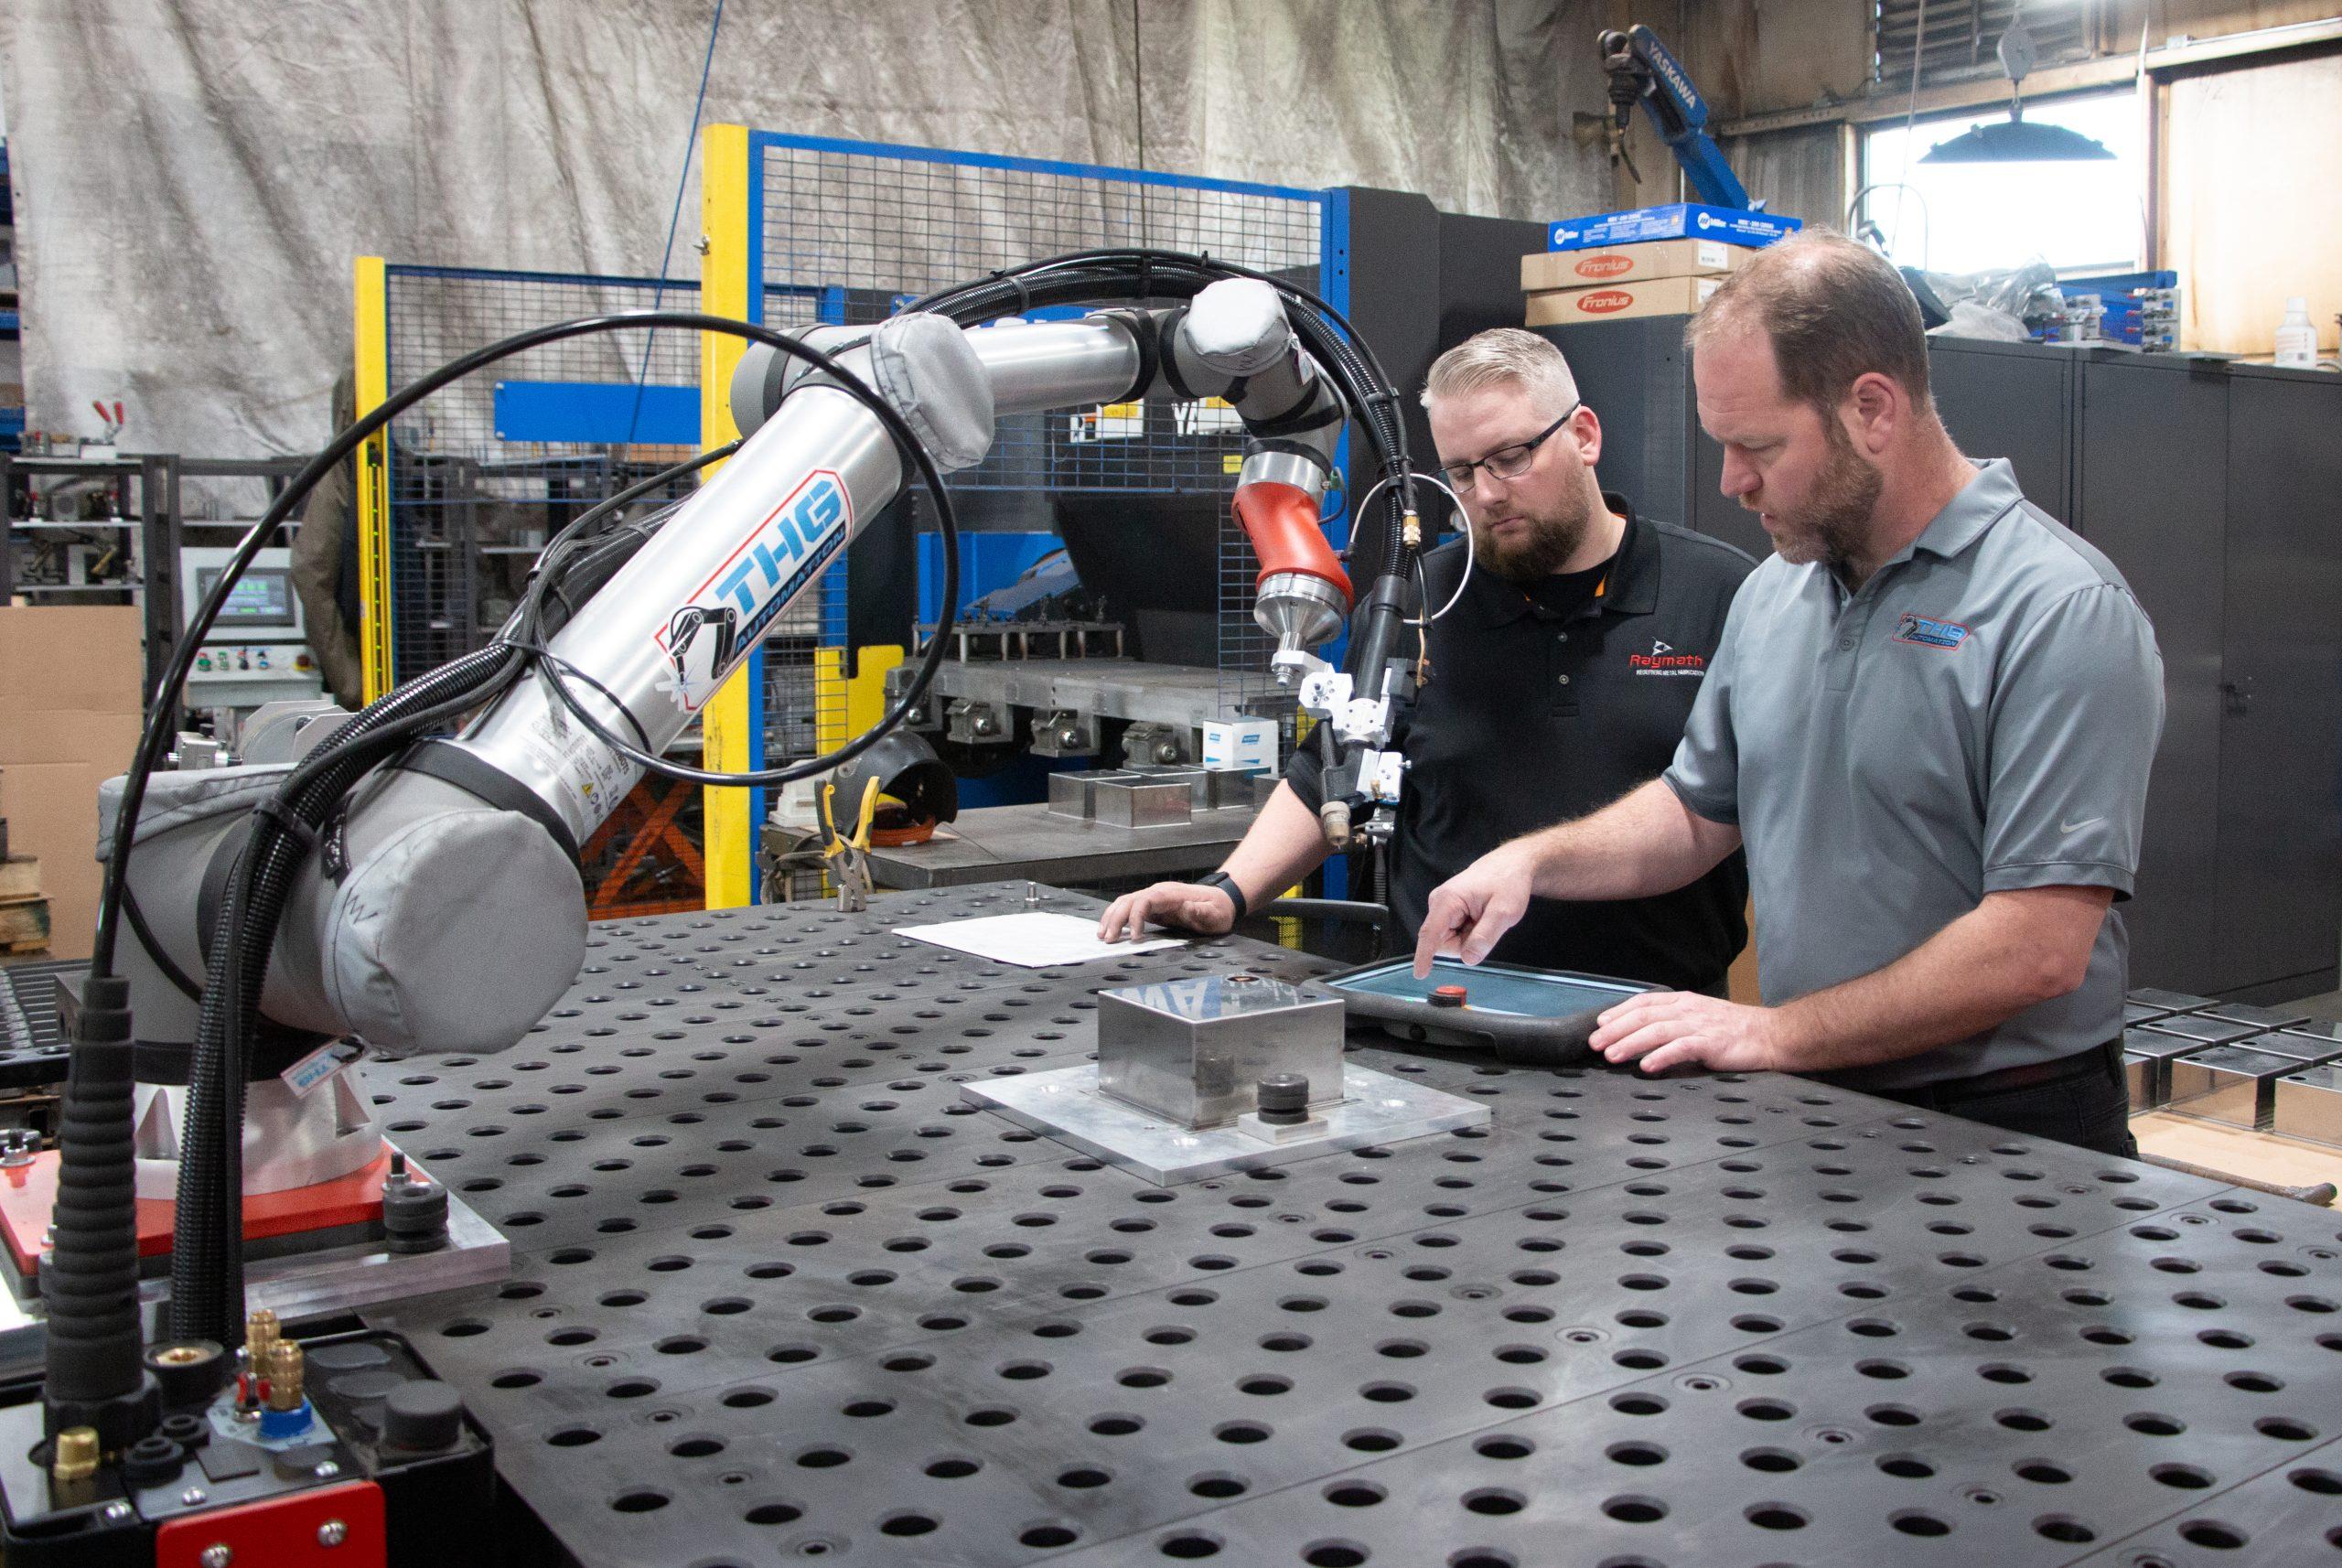 Cobots boost production 200% on TIG and MIG welding and 600% on machine tending for metal fabricator